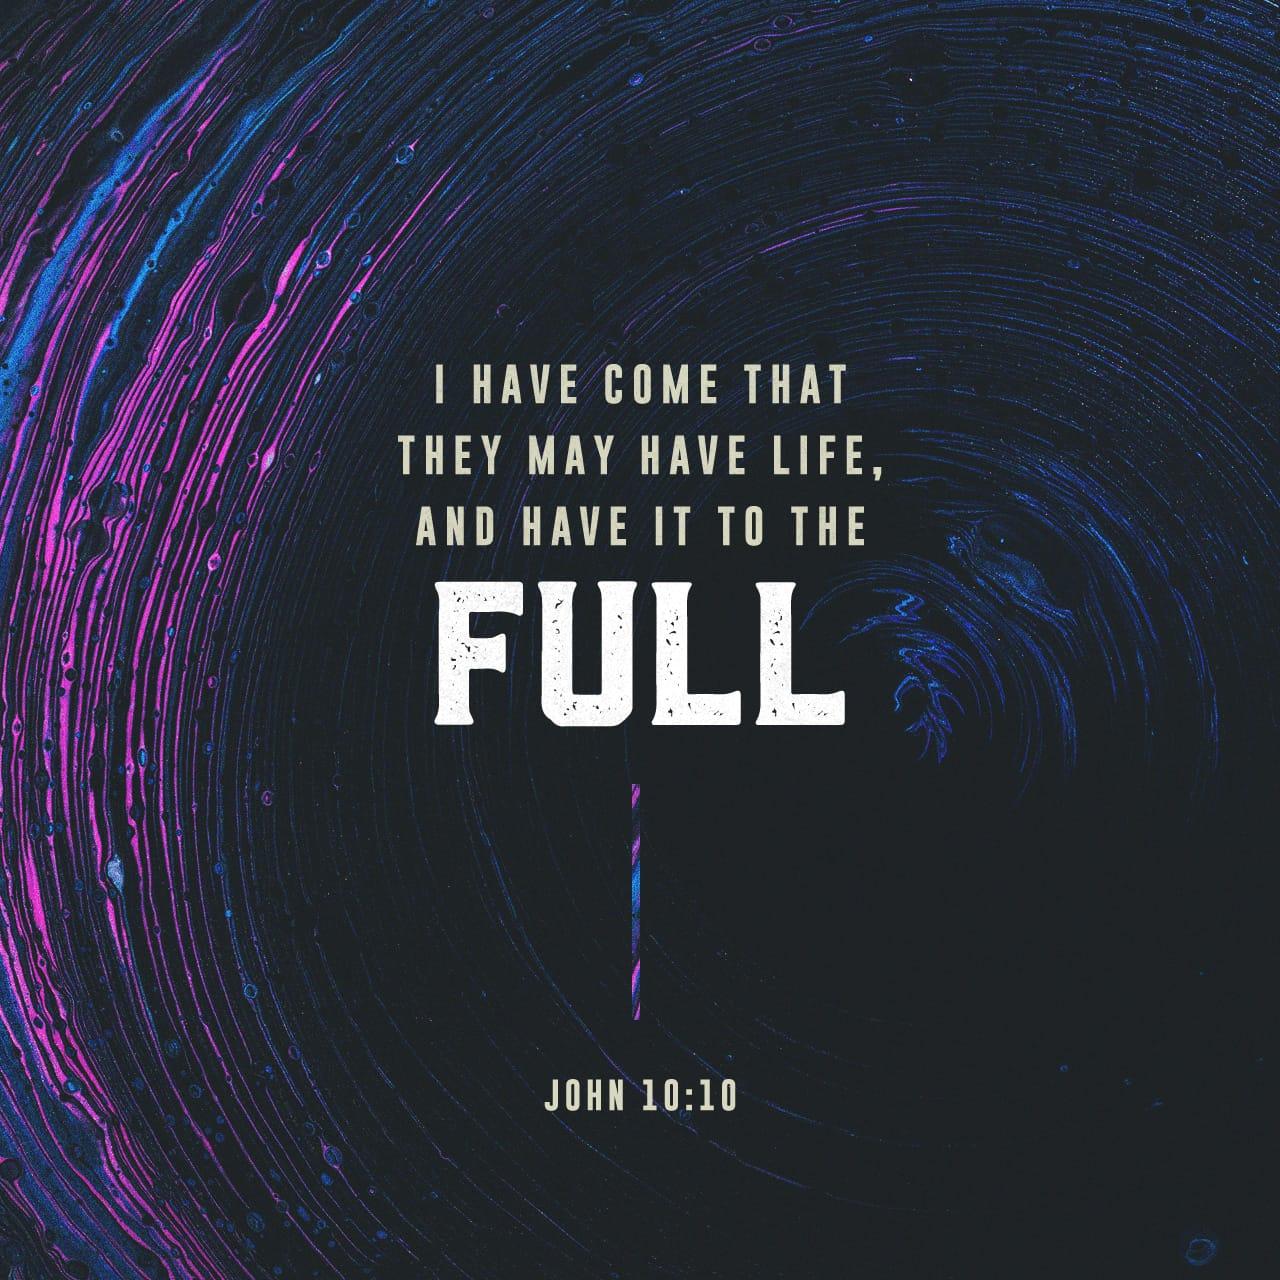 Bible Verse of the Day - day 84 - image 37579 (John 10:10)